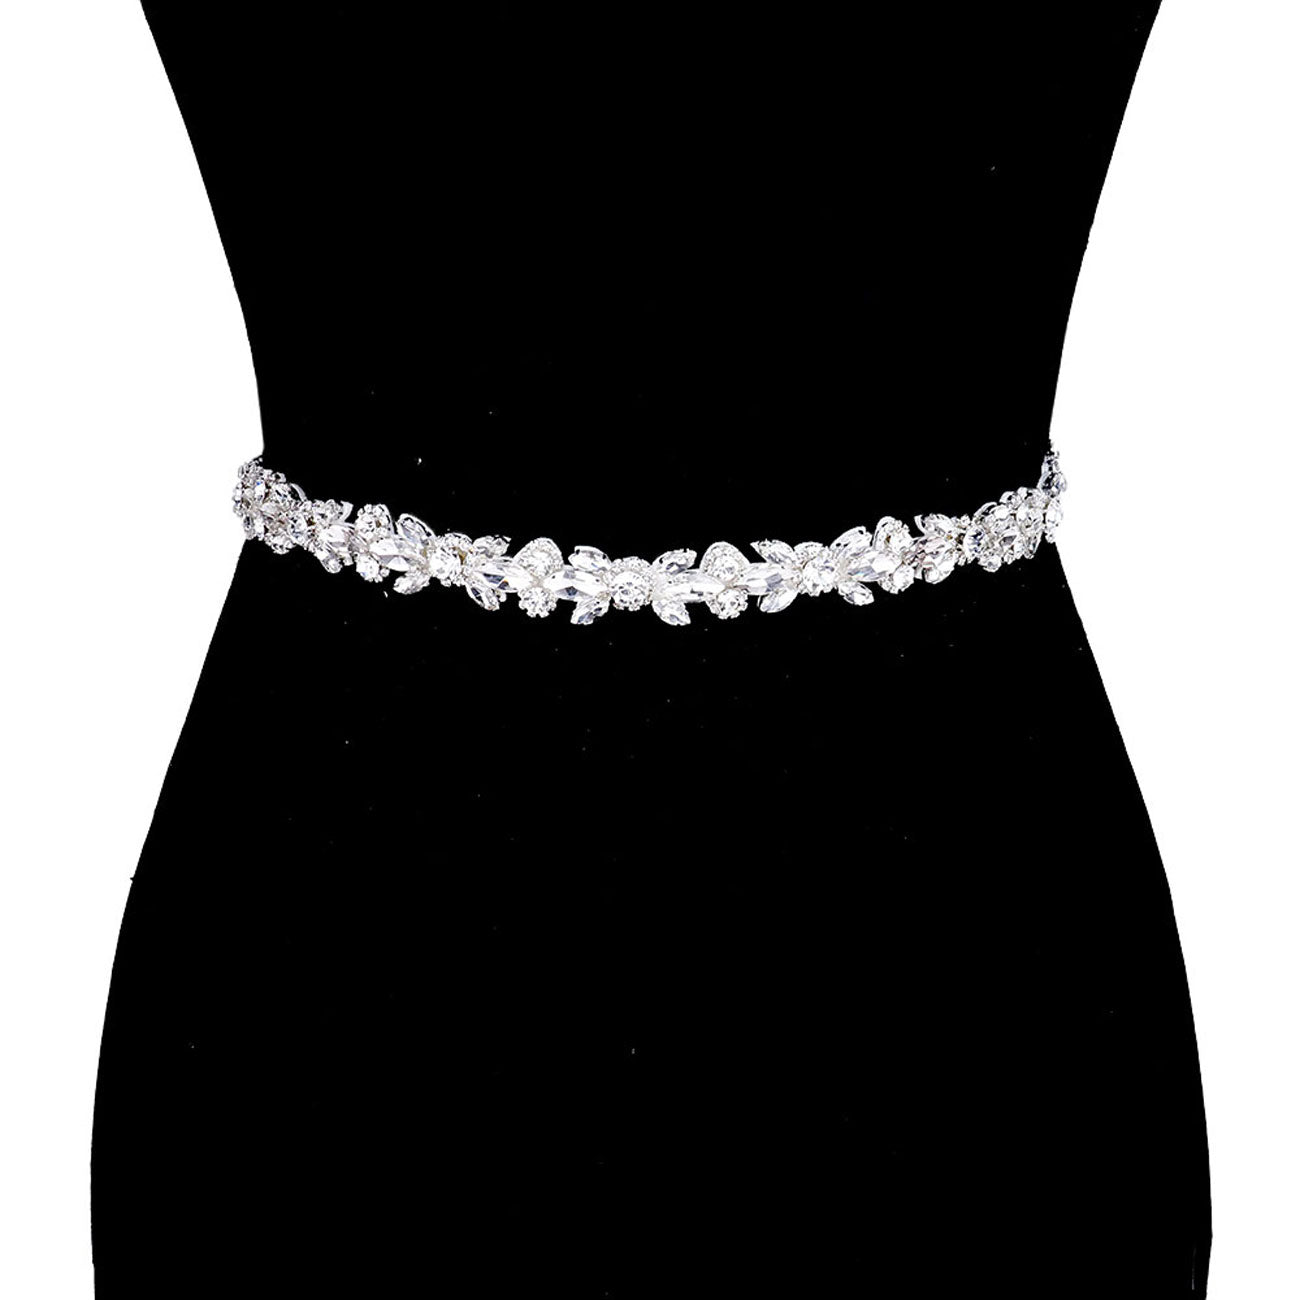 AB Silver Crystal Marquise Sash Ribbon Bridal Wedding Belt Headband, crystal applique is the newest trend and excellent embellishment for different occasions, especially for the bridal wedding, make you charming and graceful. This is a must have accessory for your very own special day. Perfect for brides, bridal parties, and any other formal occasion.